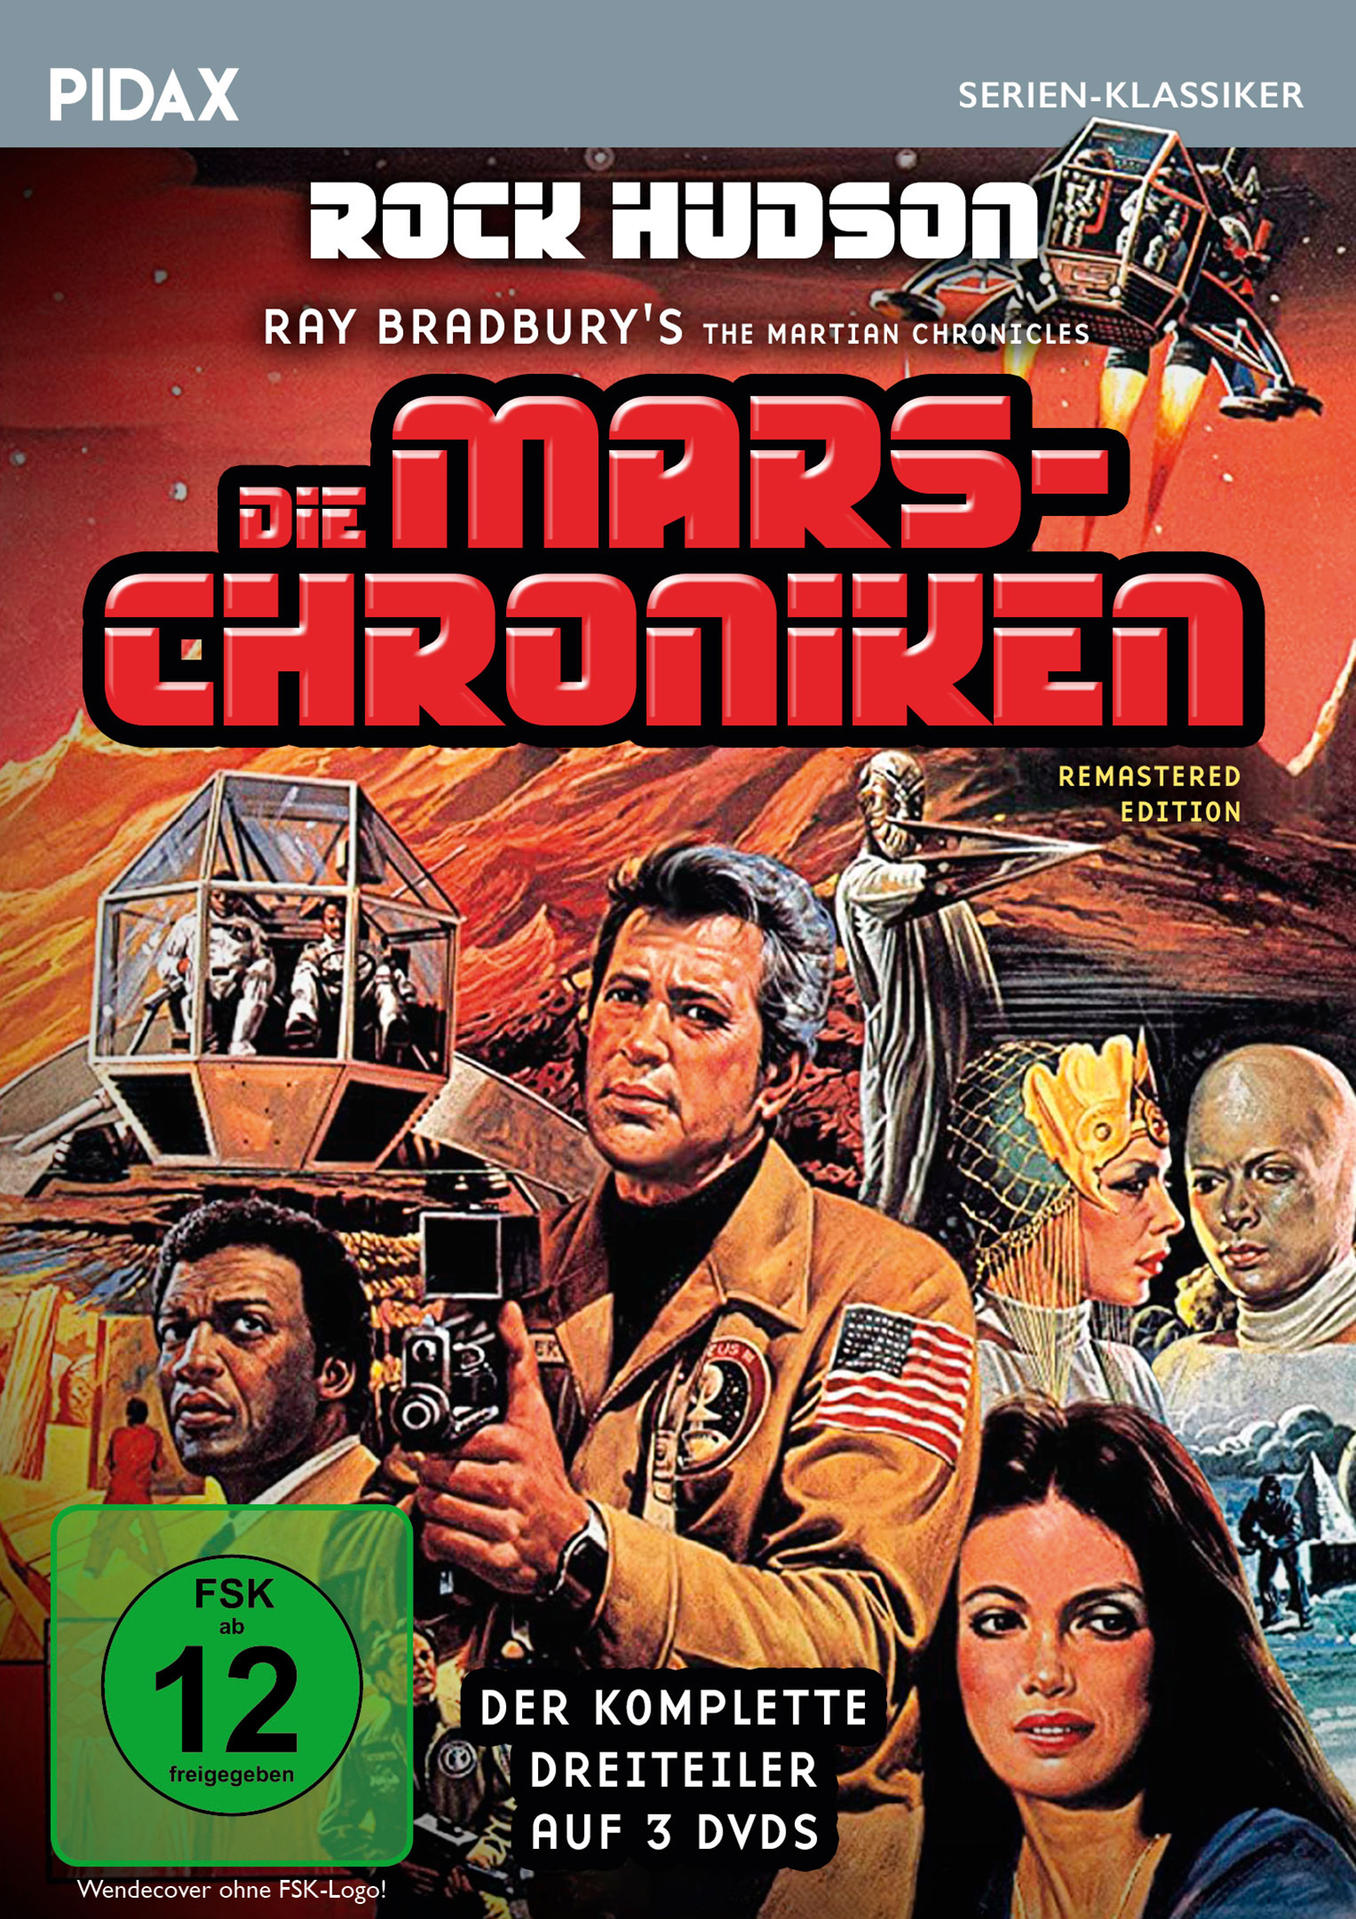 Chronicles) Mars-Chroniken - Die Martian DVD Remastered Edition (The